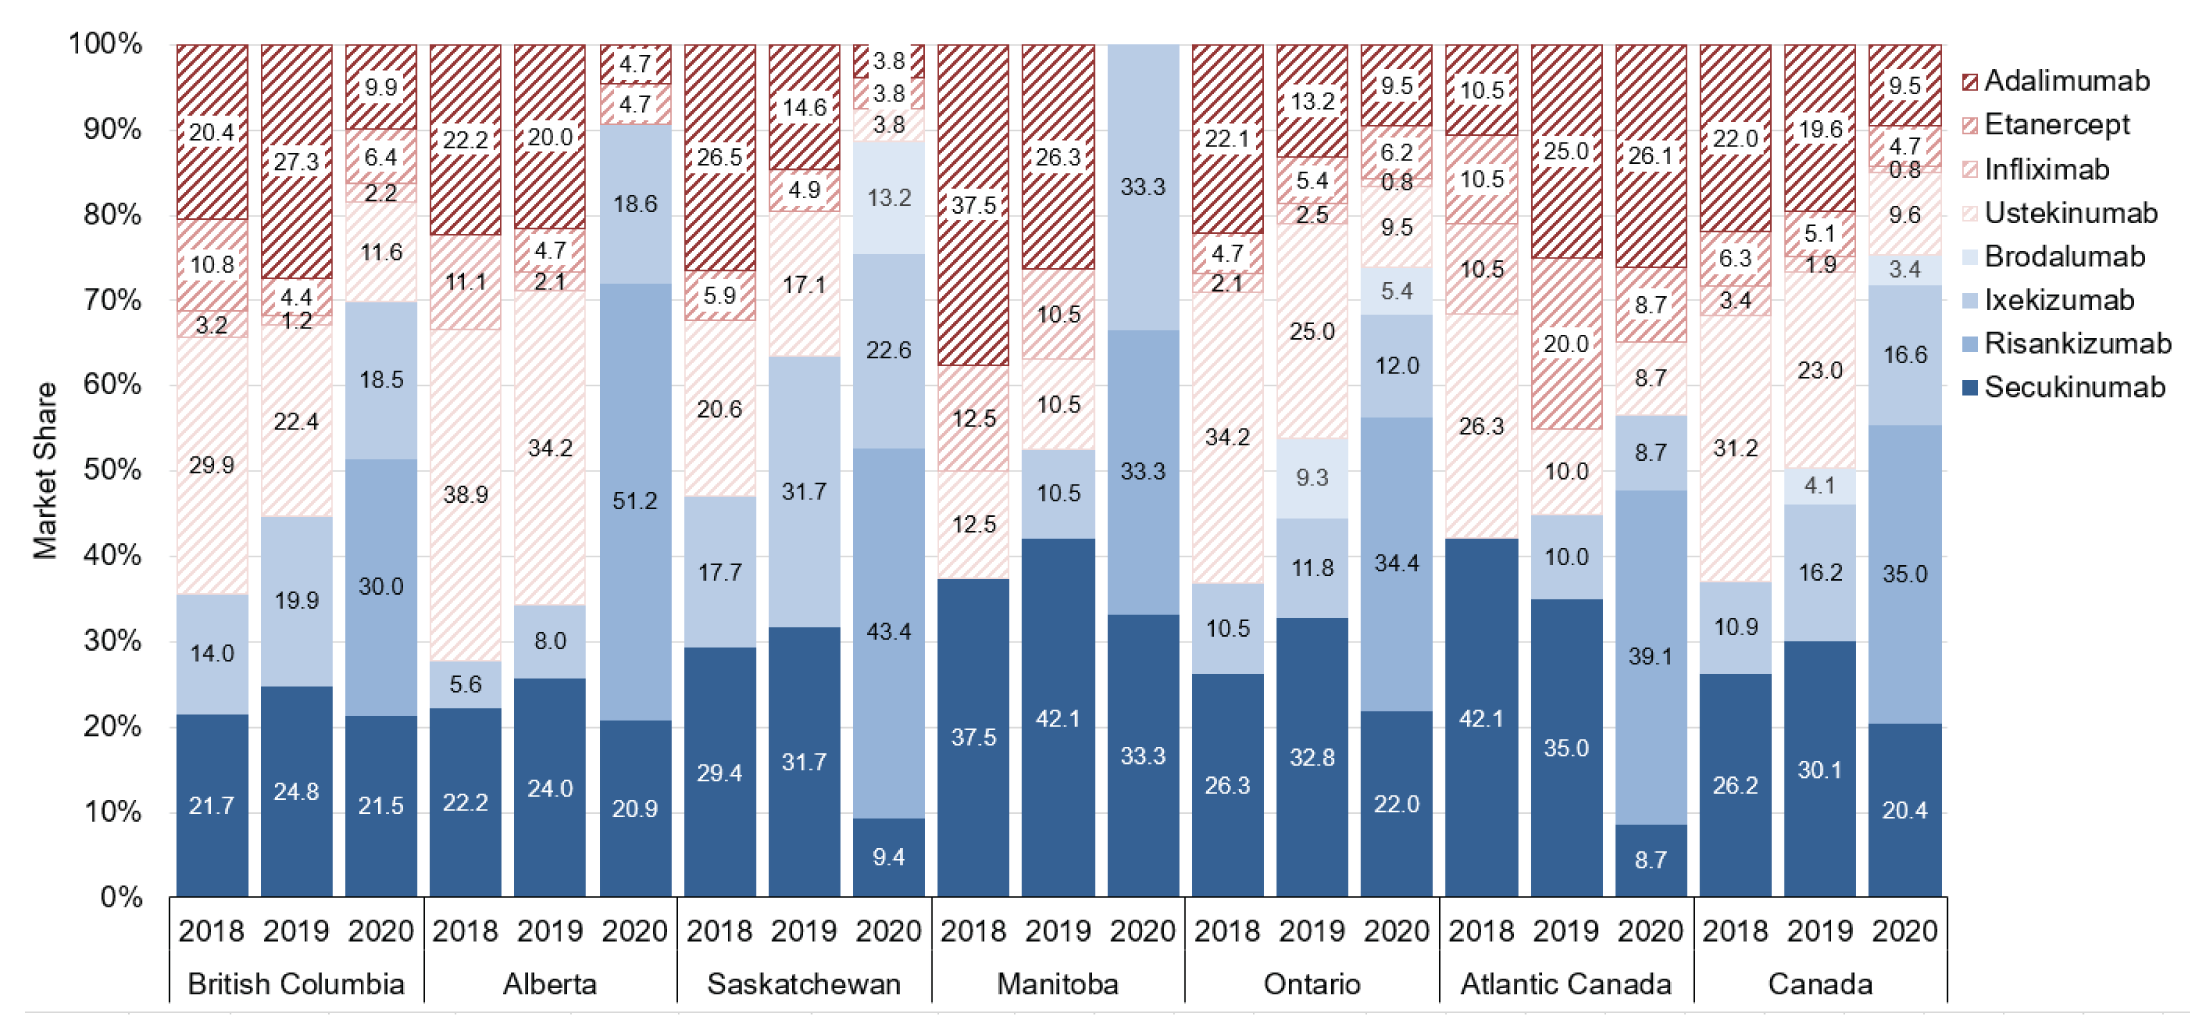 Alt text: A bar graph presenting the market share of biologics among new claimants with plaque psoriasis over time, from 2018 to 2020, by jurisdiction and nationally. The market shares of old-generation biologics have decreased year-over-year nationally and within each jurisdiction. By 2020, 25% of new claimants with plaque psoriasis in Canada were prescribed an old-generation biologic, although this proportion varied between jurisdictions.